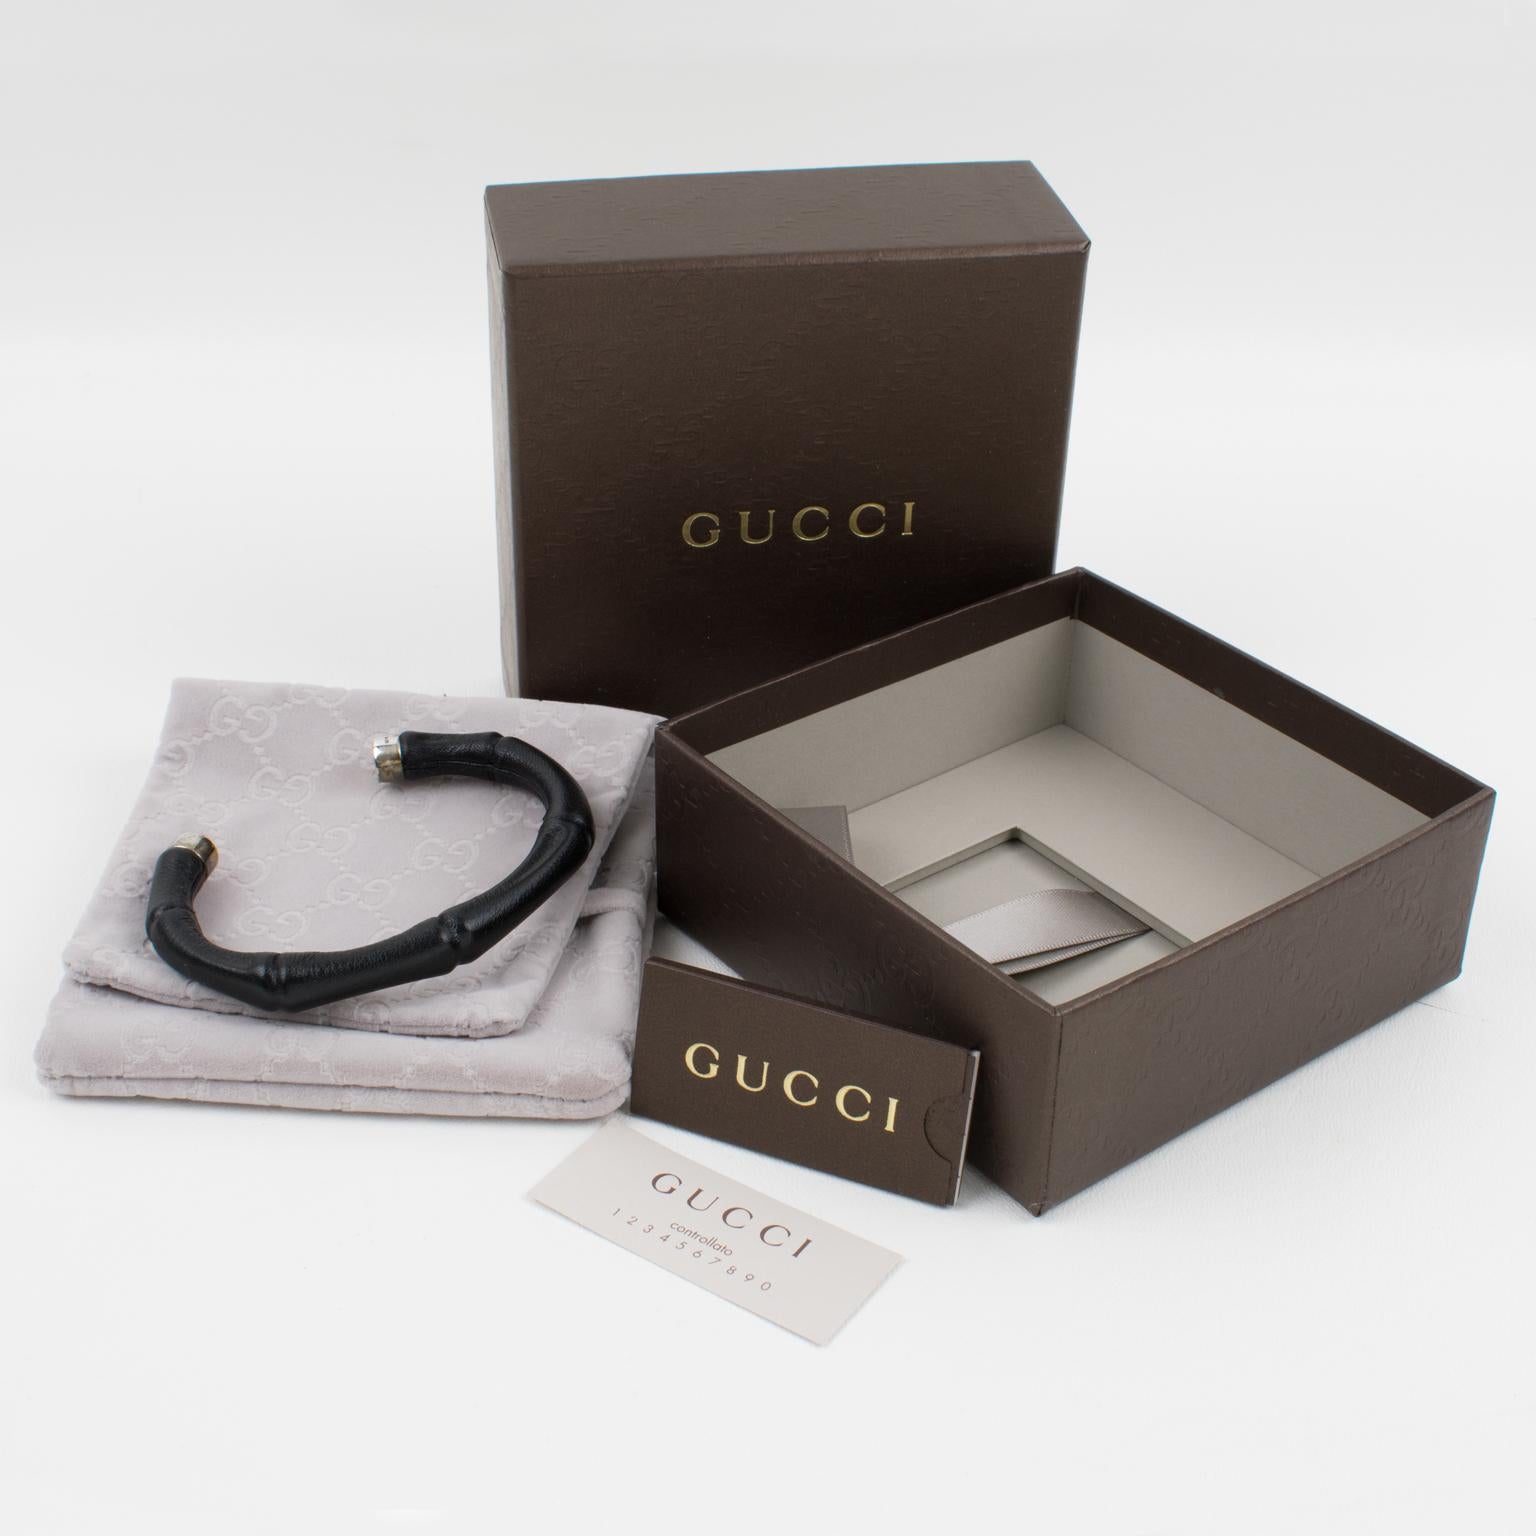 A fabulous cuff bracelet by Gucci featuring the iconic bamboo motif in black leather and sterling silver 925. The bamboo design has been a classic in the Gucci Collection, prompting an exhibition dedicated to it and named 